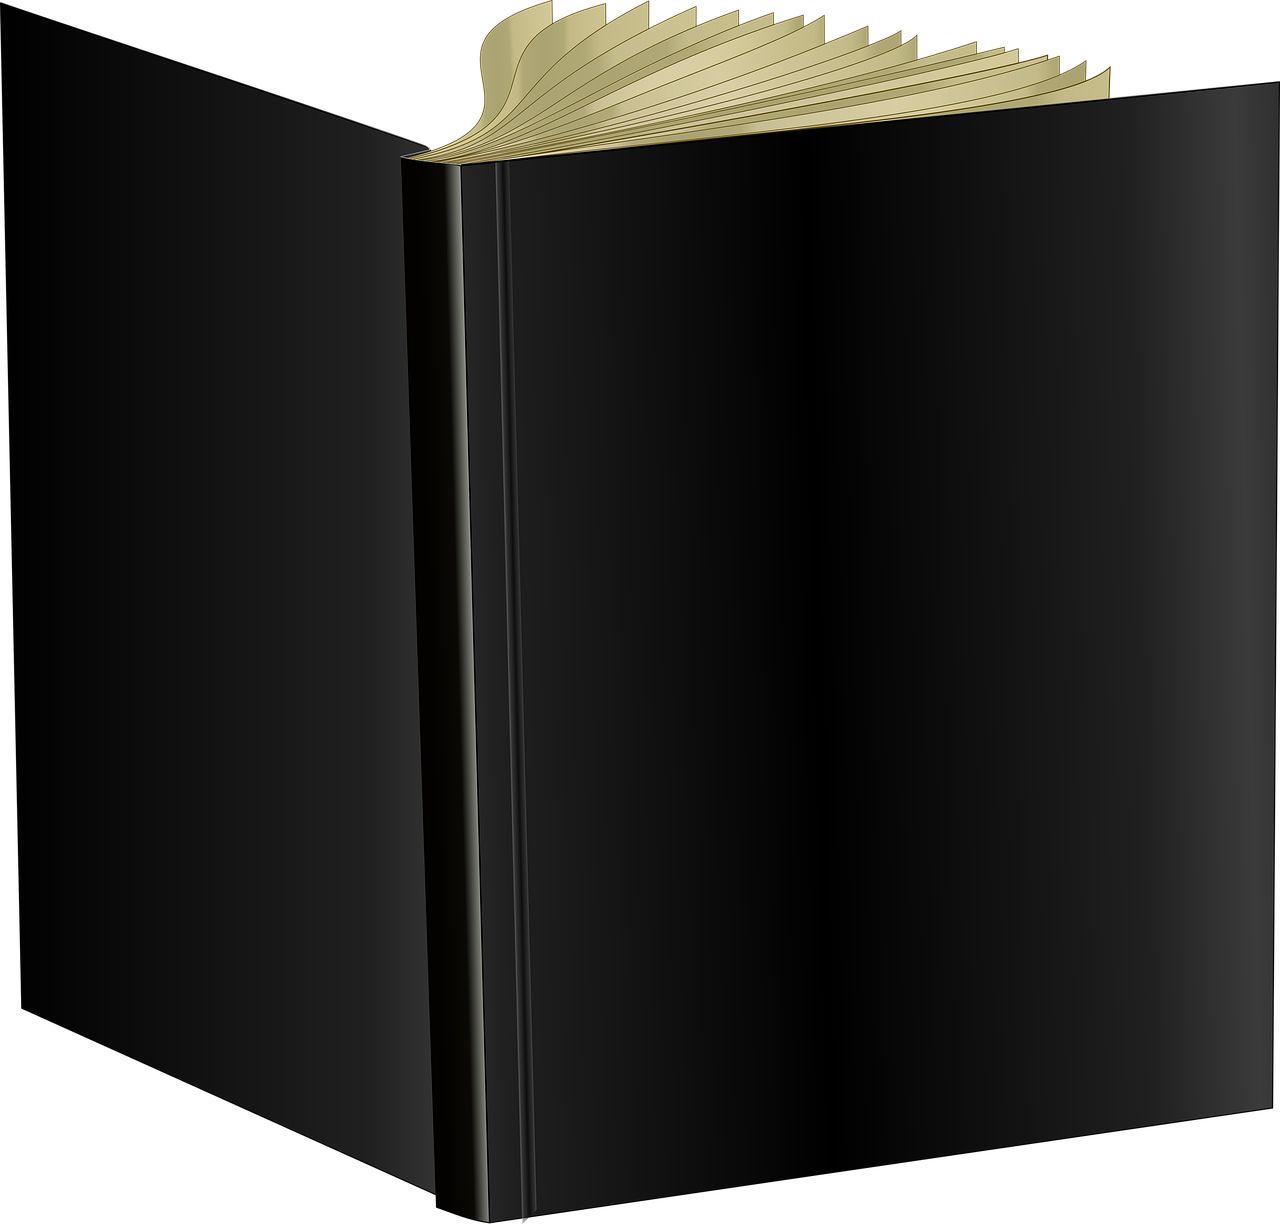 A Black Book With A Gold Edge